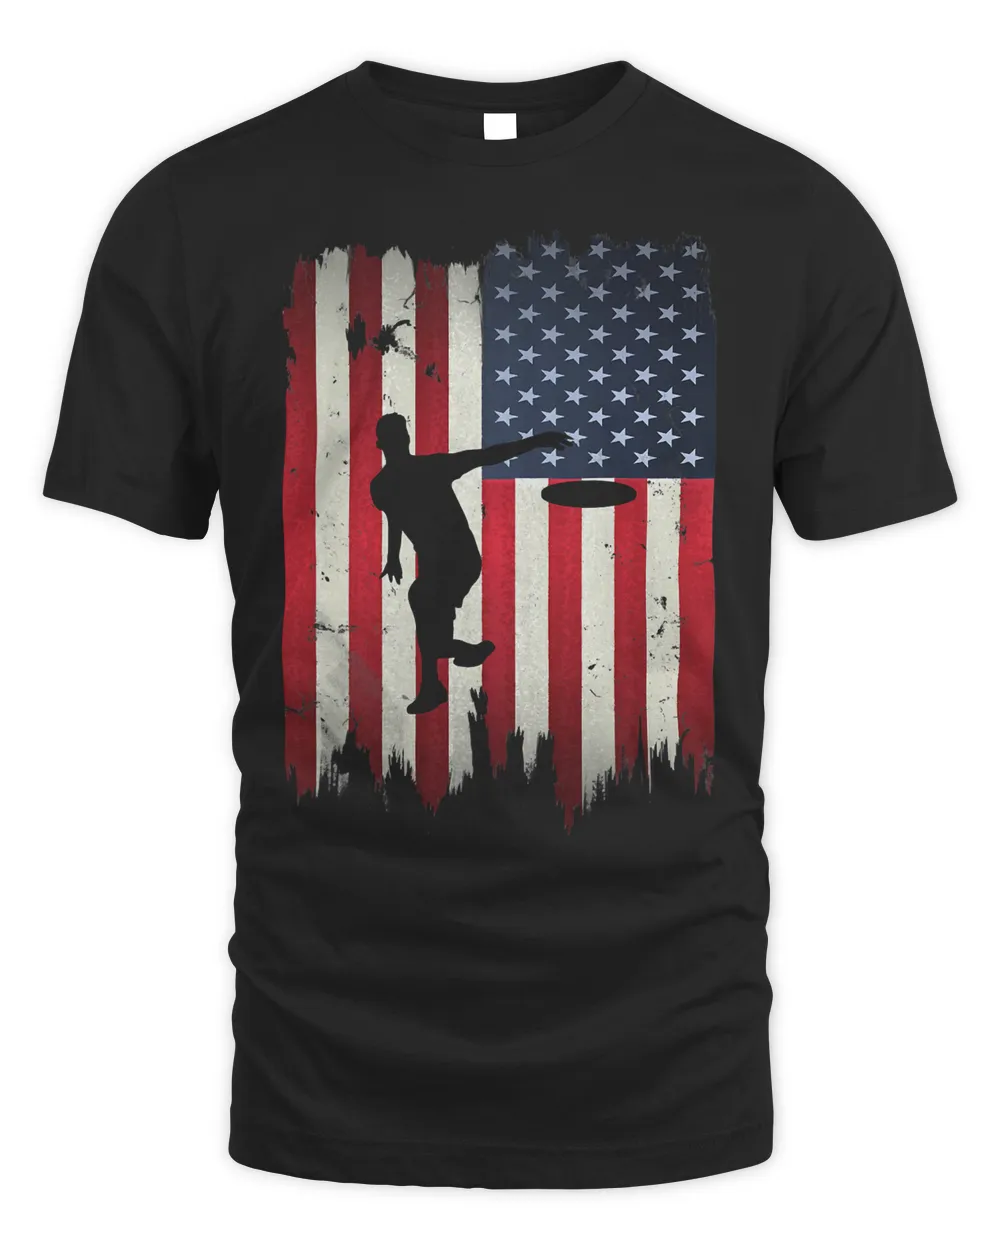 Ultimate Frisbee Disc Golf USA American Flag 4th of July T-Shirt